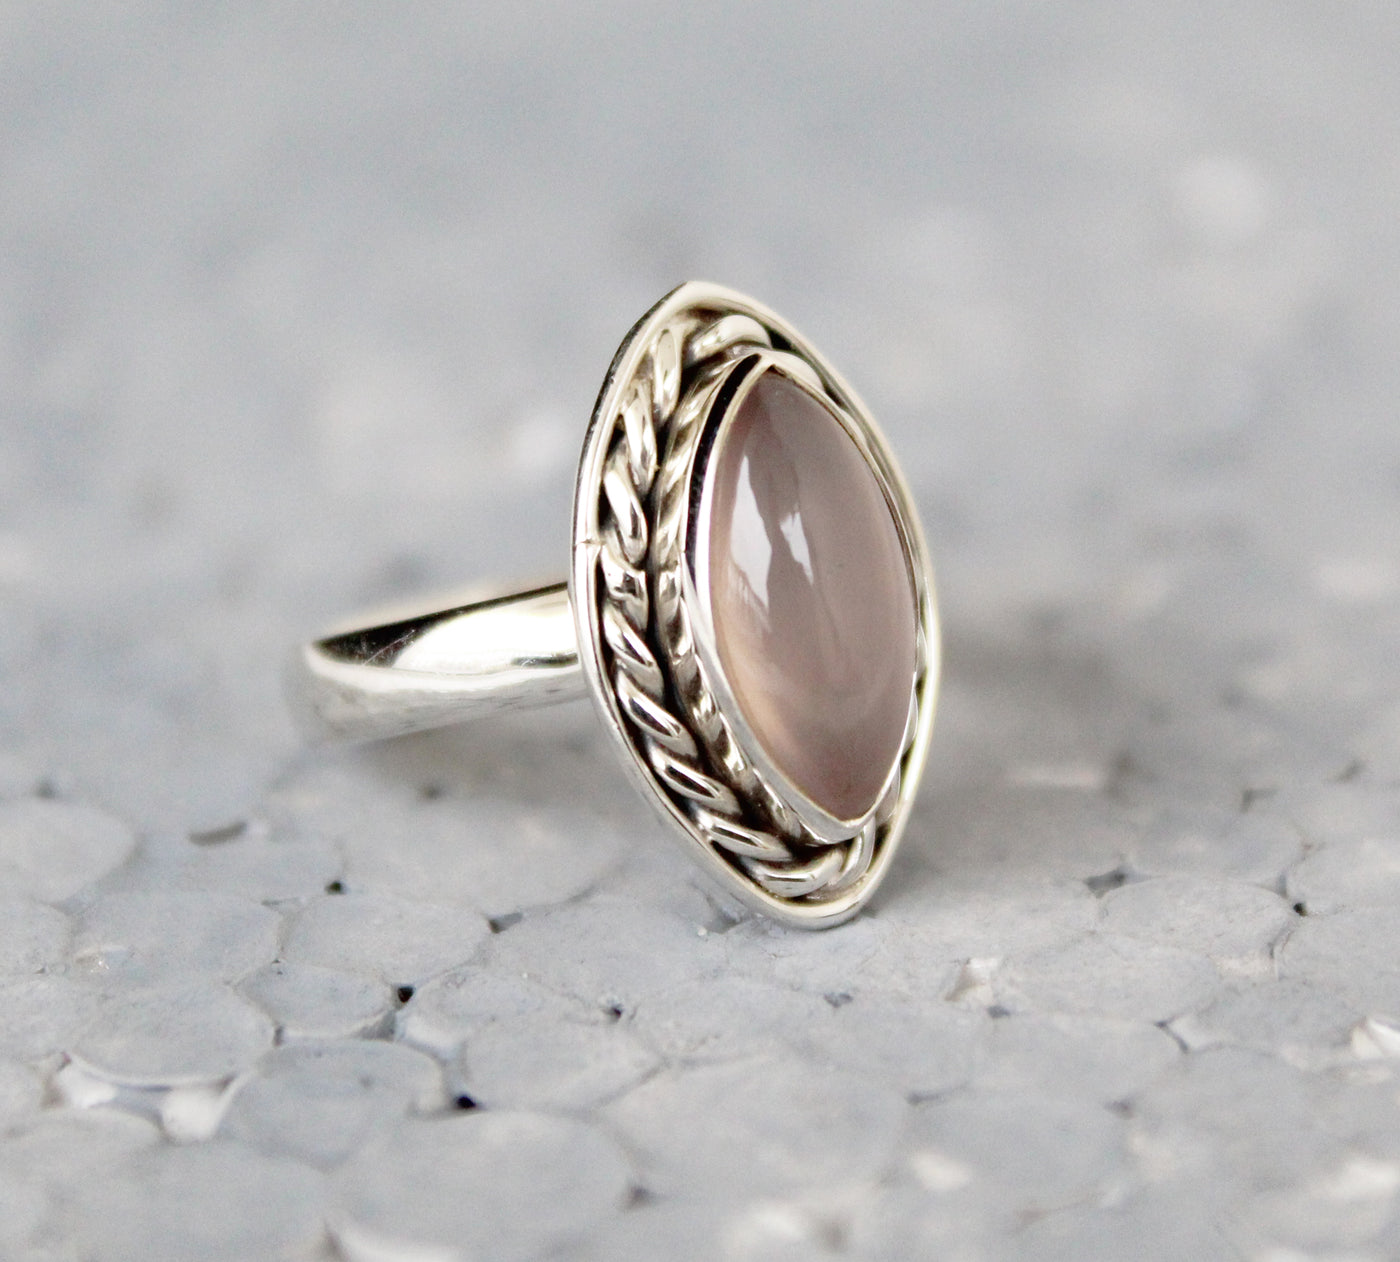 Pink Chalcedony Ring, Handmade Ring, 925 Sterling Silver, Statement Ring, Birthstone Jewelry, Pink Gemstone Ring, Free Shipping